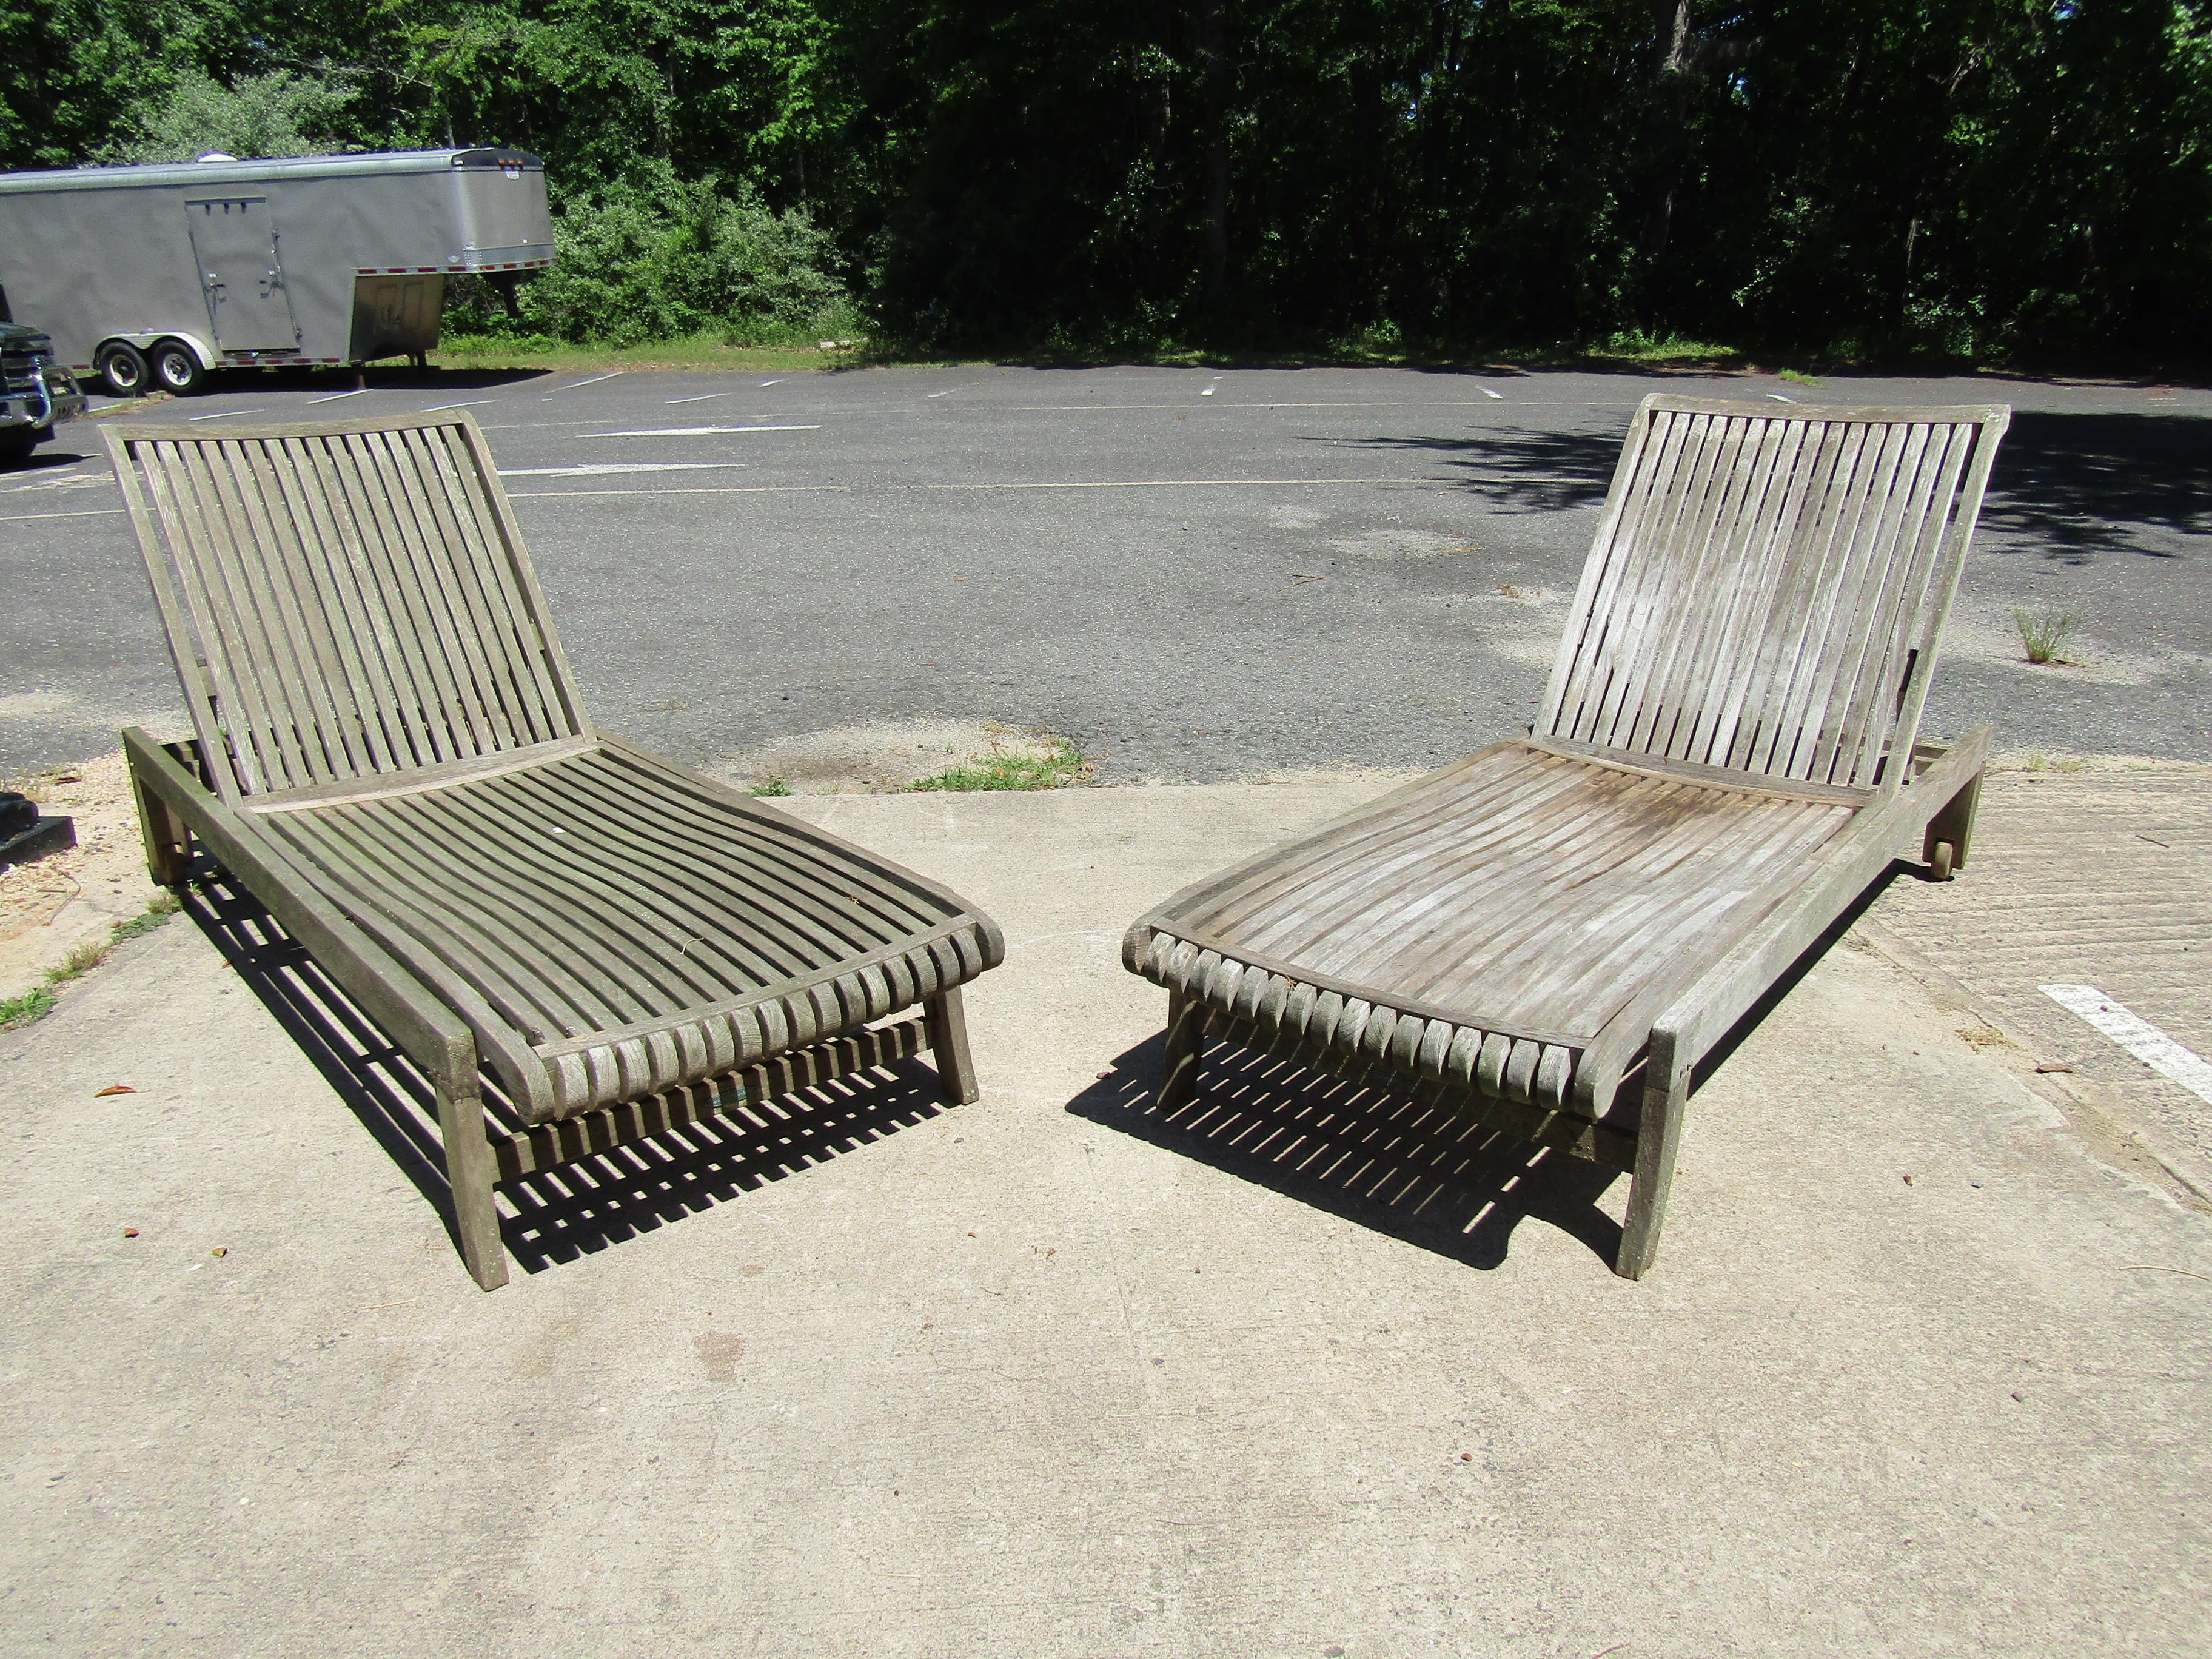 Unique pair of Smith & Hawken lounge chairs in an all wood design. These chairs feature 2 wheels for easy transportation and have sleek mid century look. Make them yours today. Please confirm item location (NY or NJ).